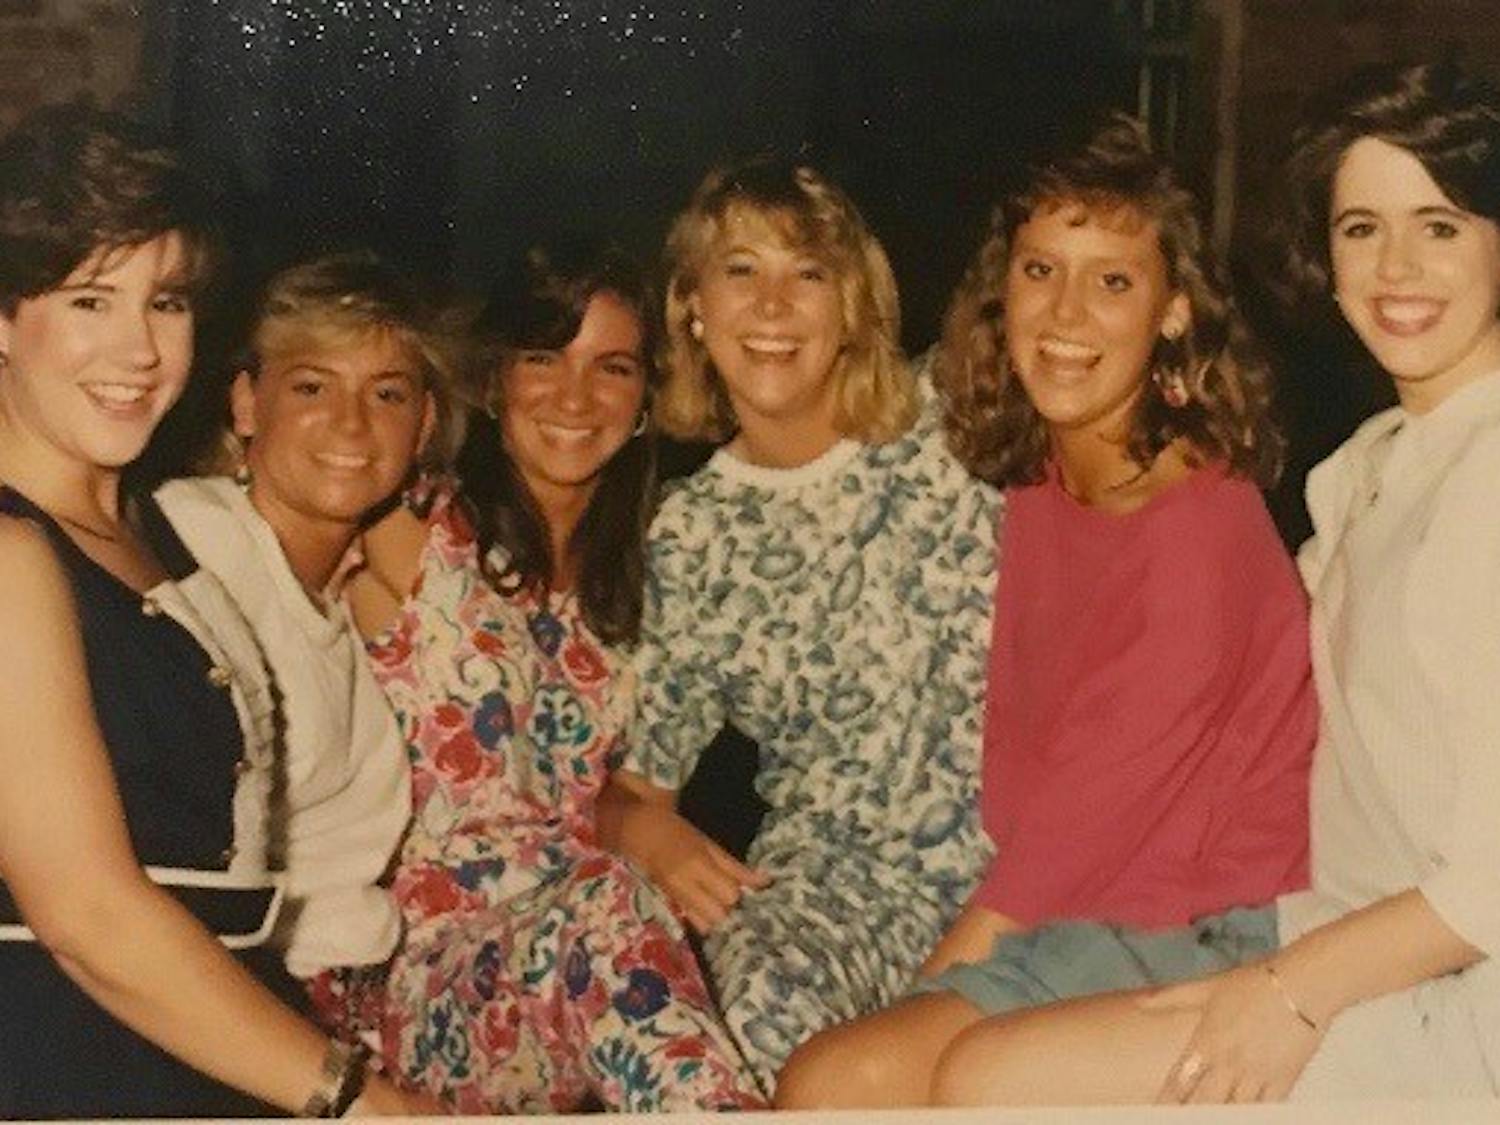 Ashley McCrary, far right, poses with some of her sorority sisters during her time at Auburn.